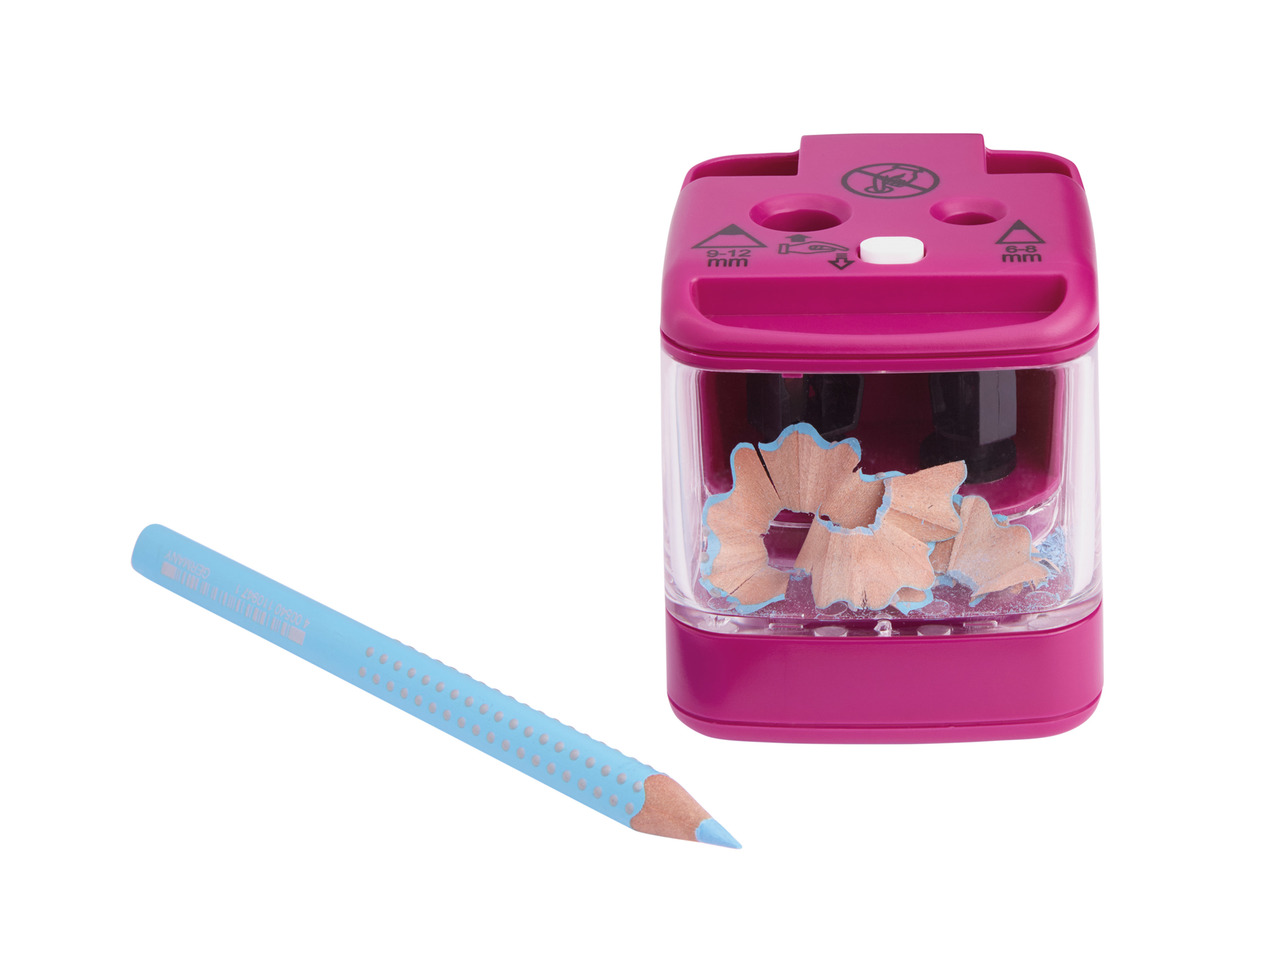 United Office Electric Pencil Sharpener1